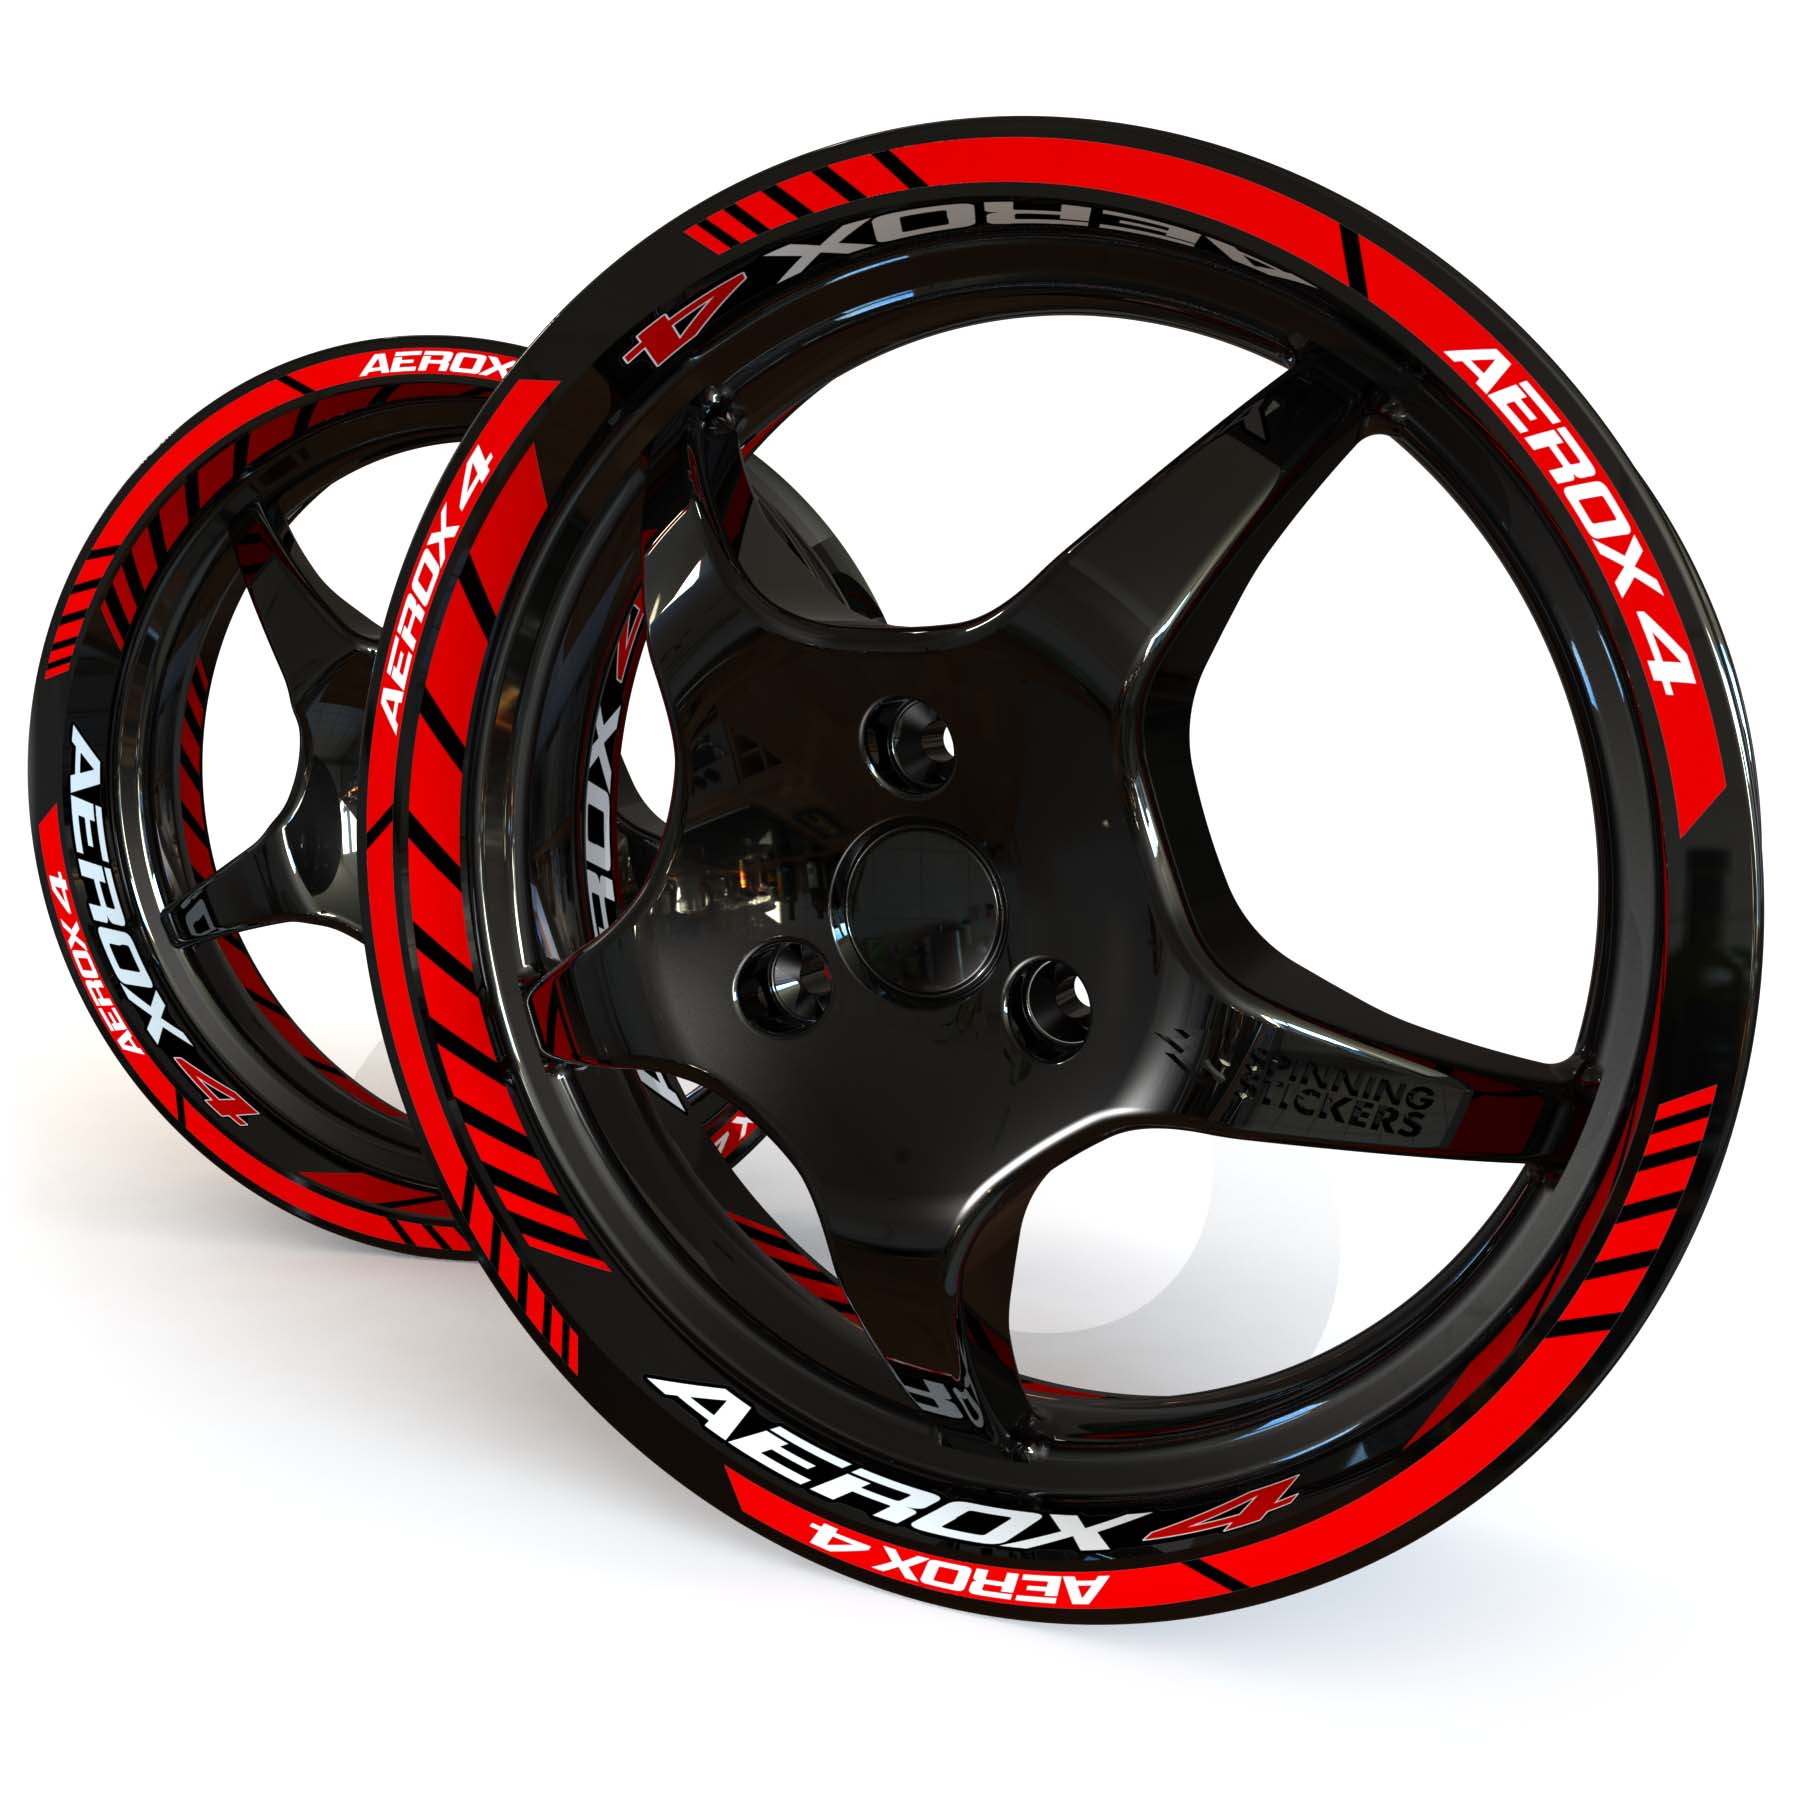 Red and white Yamaha Aerox 4 wheel stickers on a black 12 inch moped rim